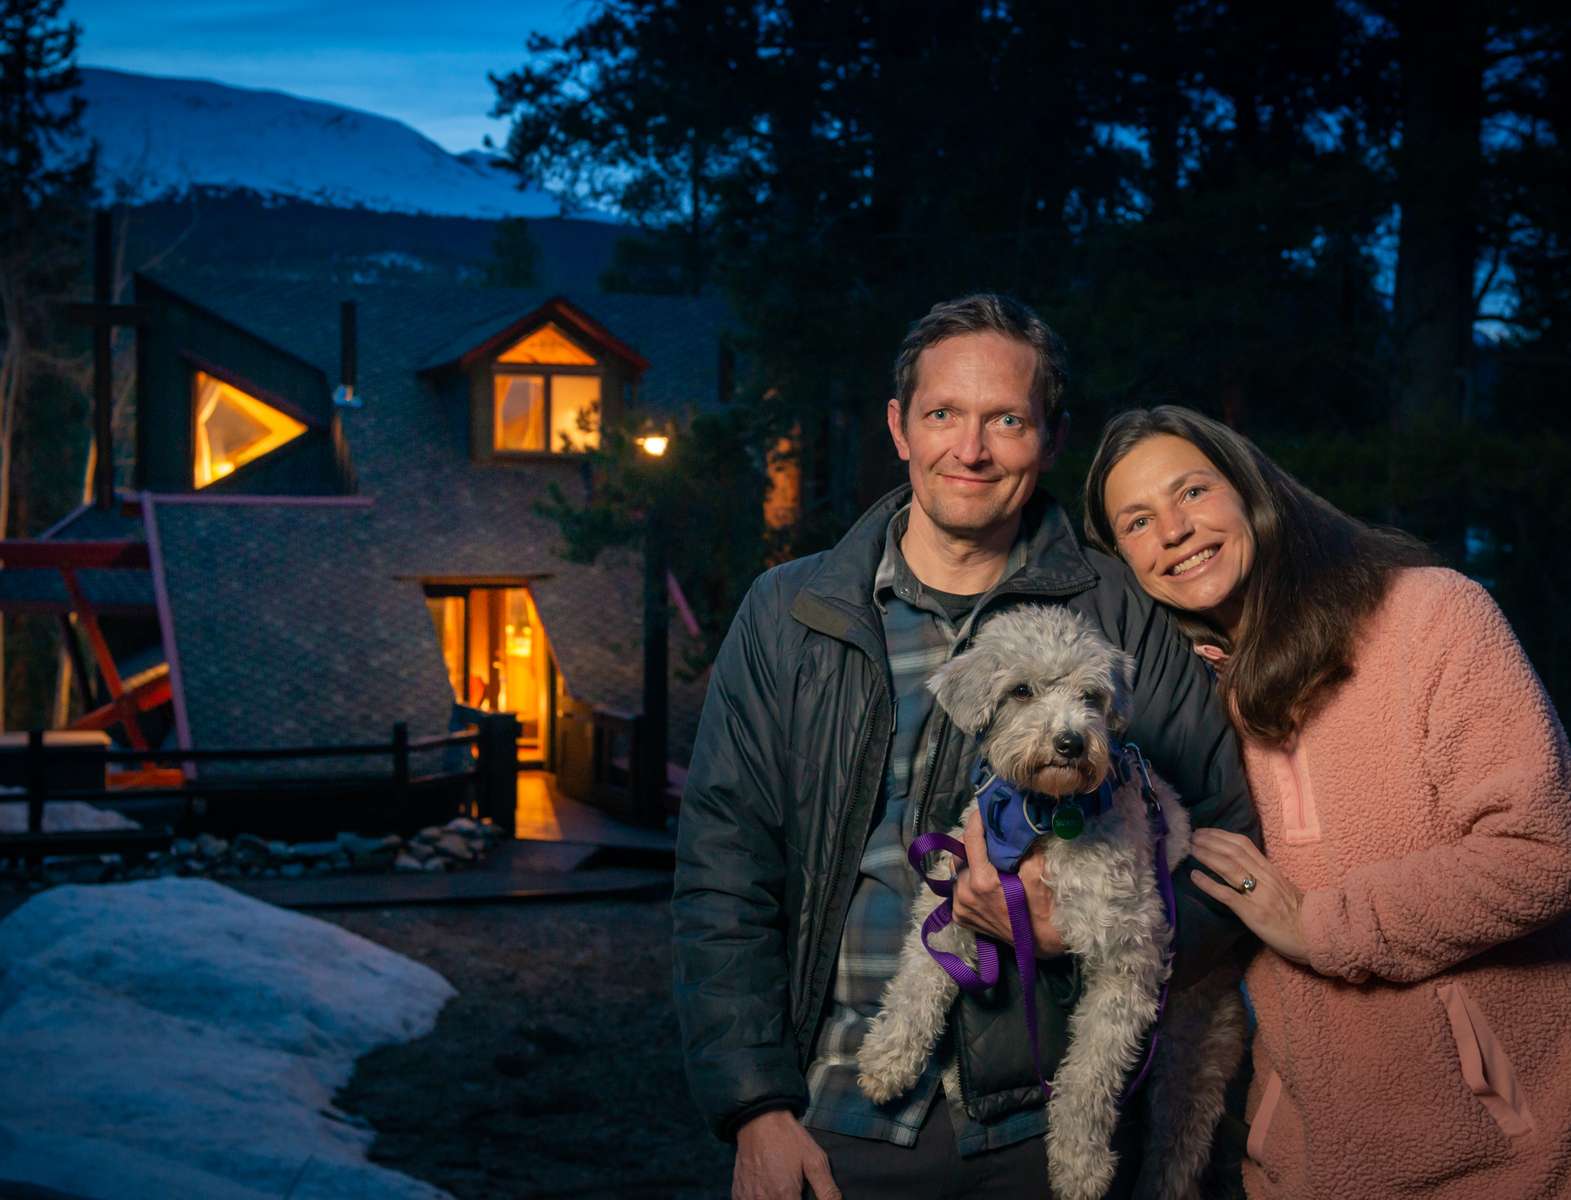 A Colorado couple with their dog and best friend, Sunny, at dusk in front of their unique mountain cabin  as winter gives way to mud season.